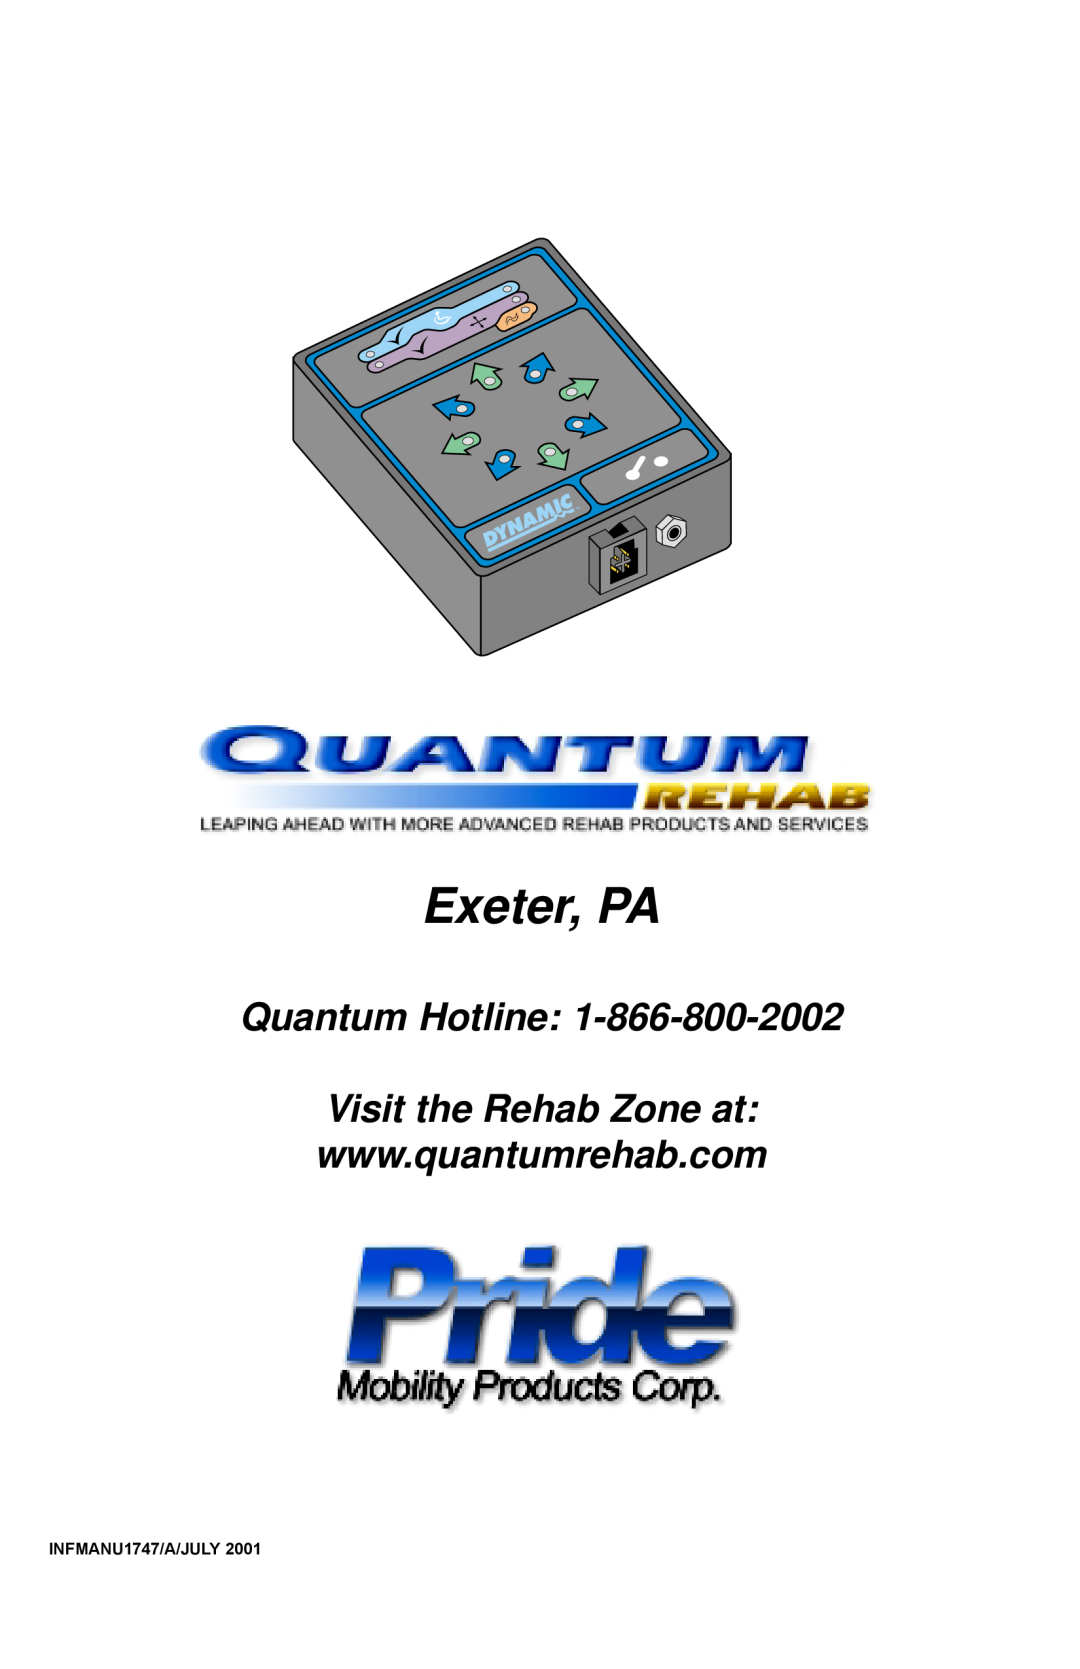 Quantum manual Exeter, PA, Quantum Hotline Visit the Rehab Zone at, Basic Operation Instructions, DX Scanner 